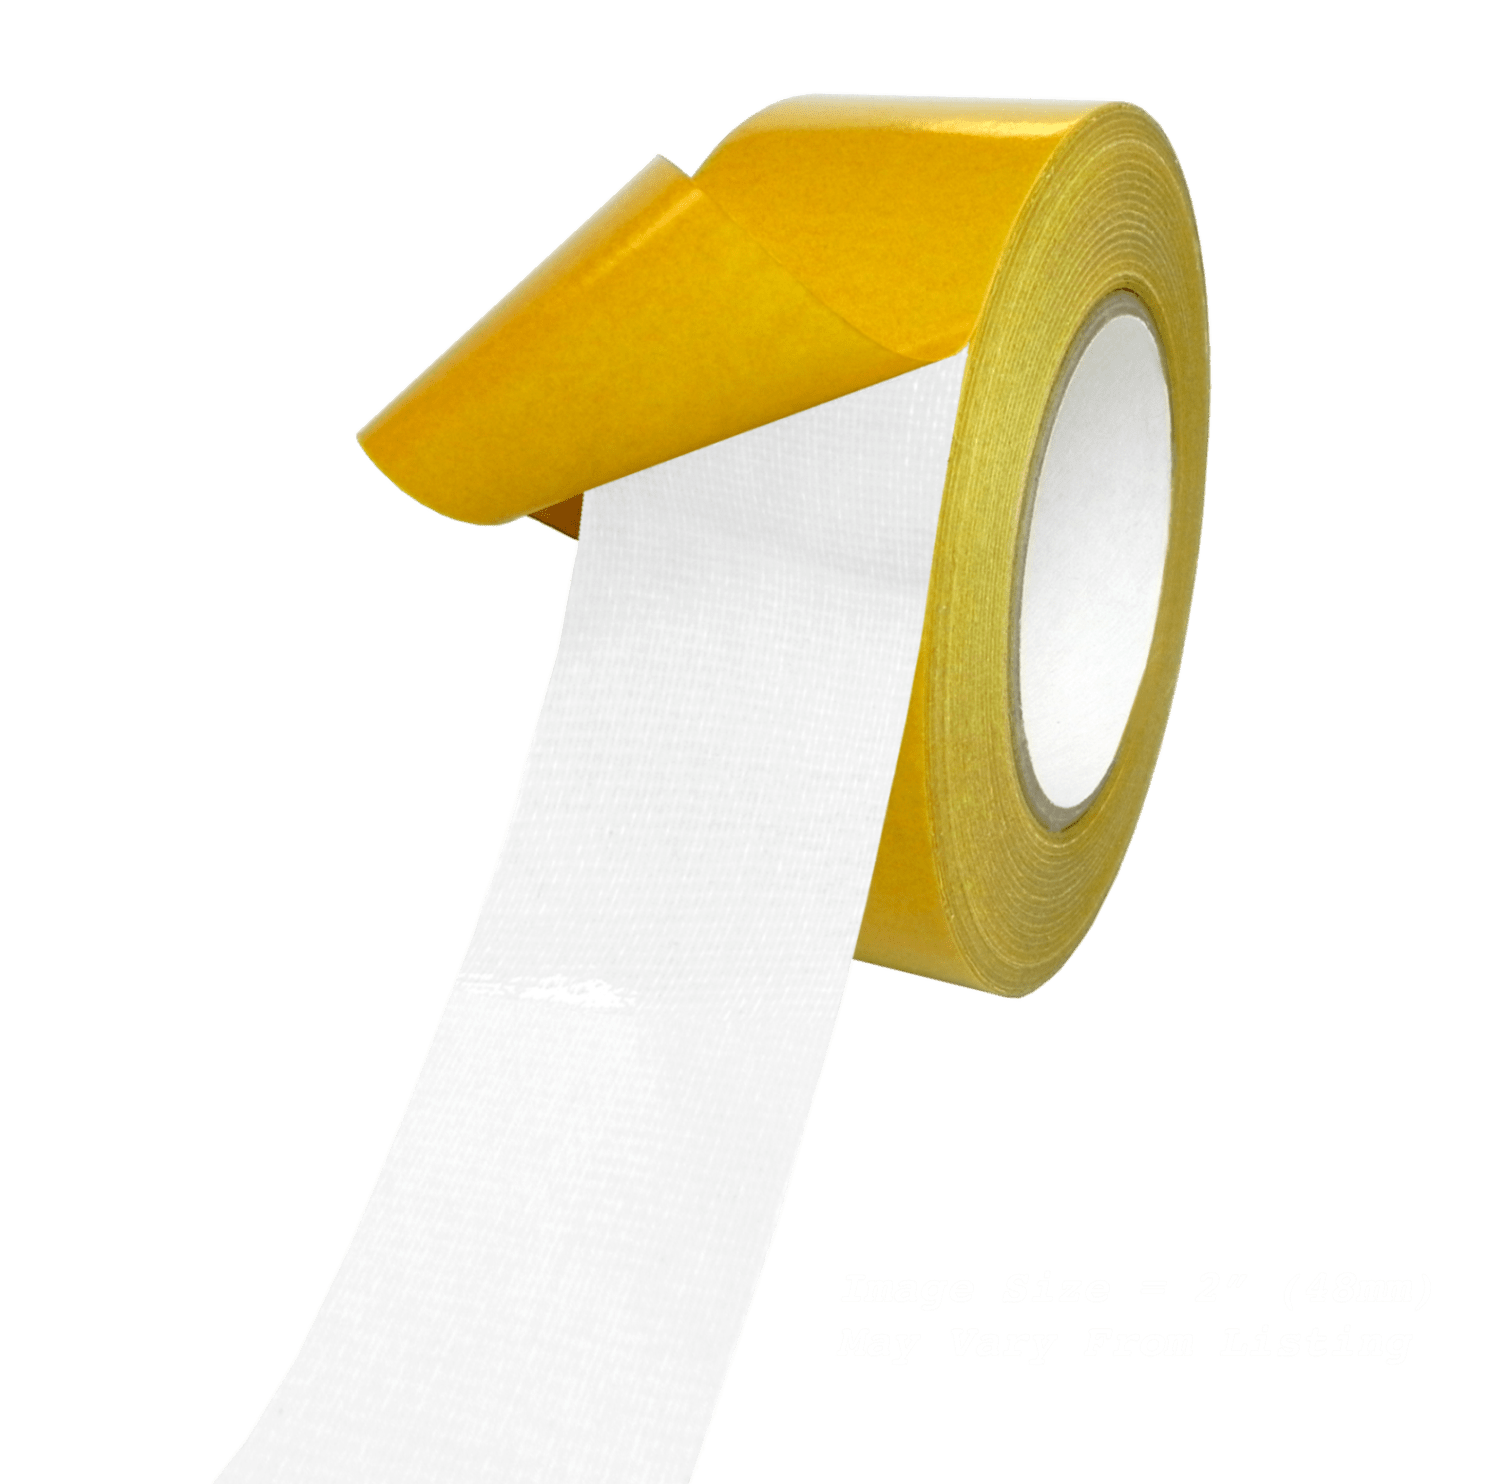  COUMENO Fabric Tape Double Sided, 1 X66FT,Double Clear  Tape,Durable Duct Tape，Super Sticky Clear Tape,Easy to Remove Without  Residue, for Wall Decor,Rugs and Clothing etc. : Office Products